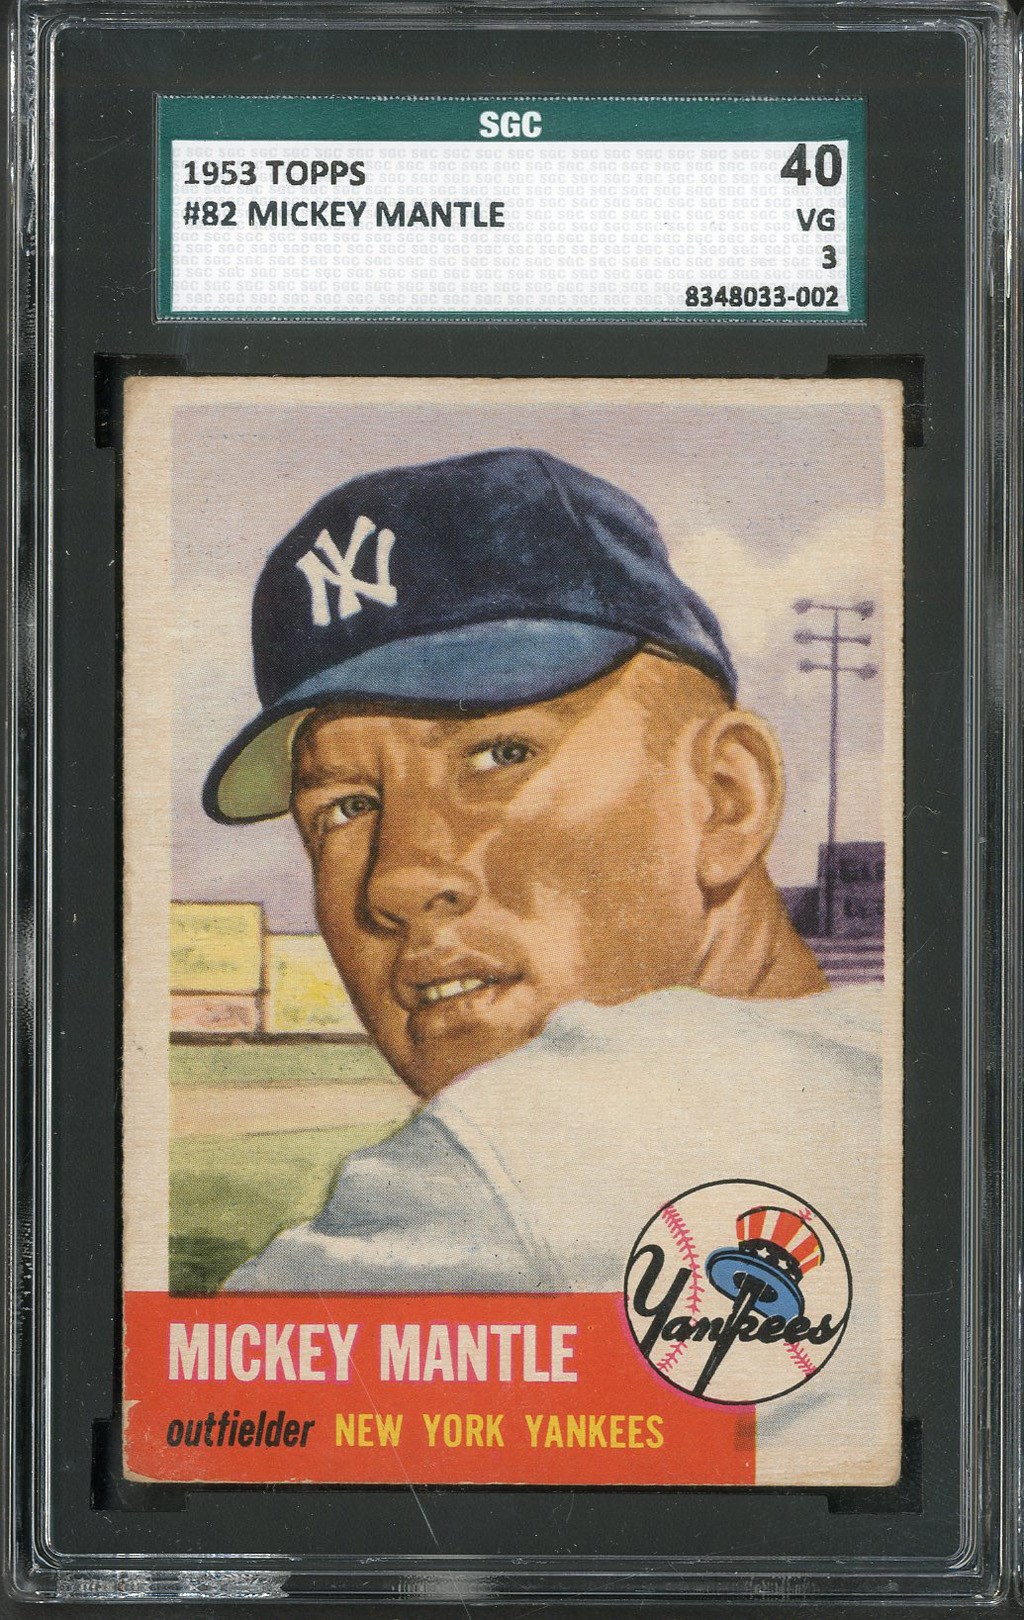 - 1953 Topps #83 Mickey Mantle - SGC 40 VG 3